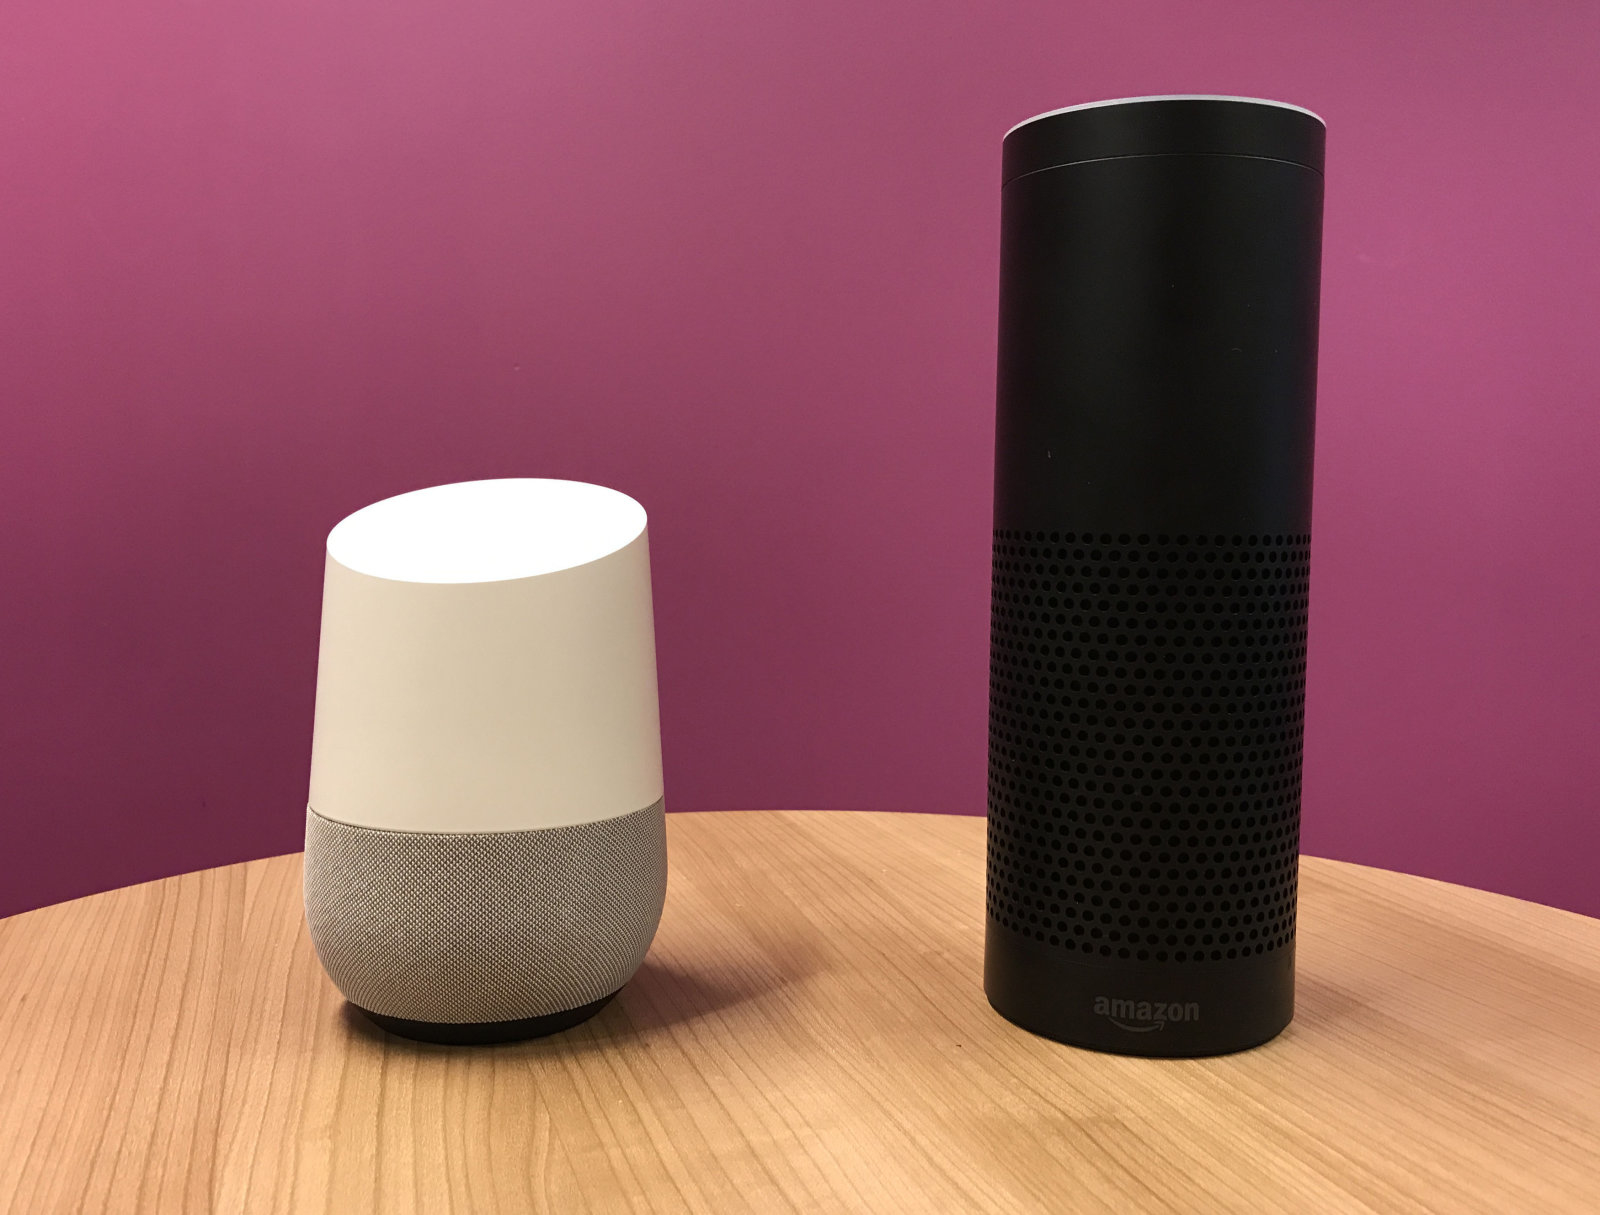 Embargoed to 0800 Wednesday October 25 File photo Google Home (left) and Amazon's Echo (right), as nearly a quarter of British households now contain a smart home product, according to new research.